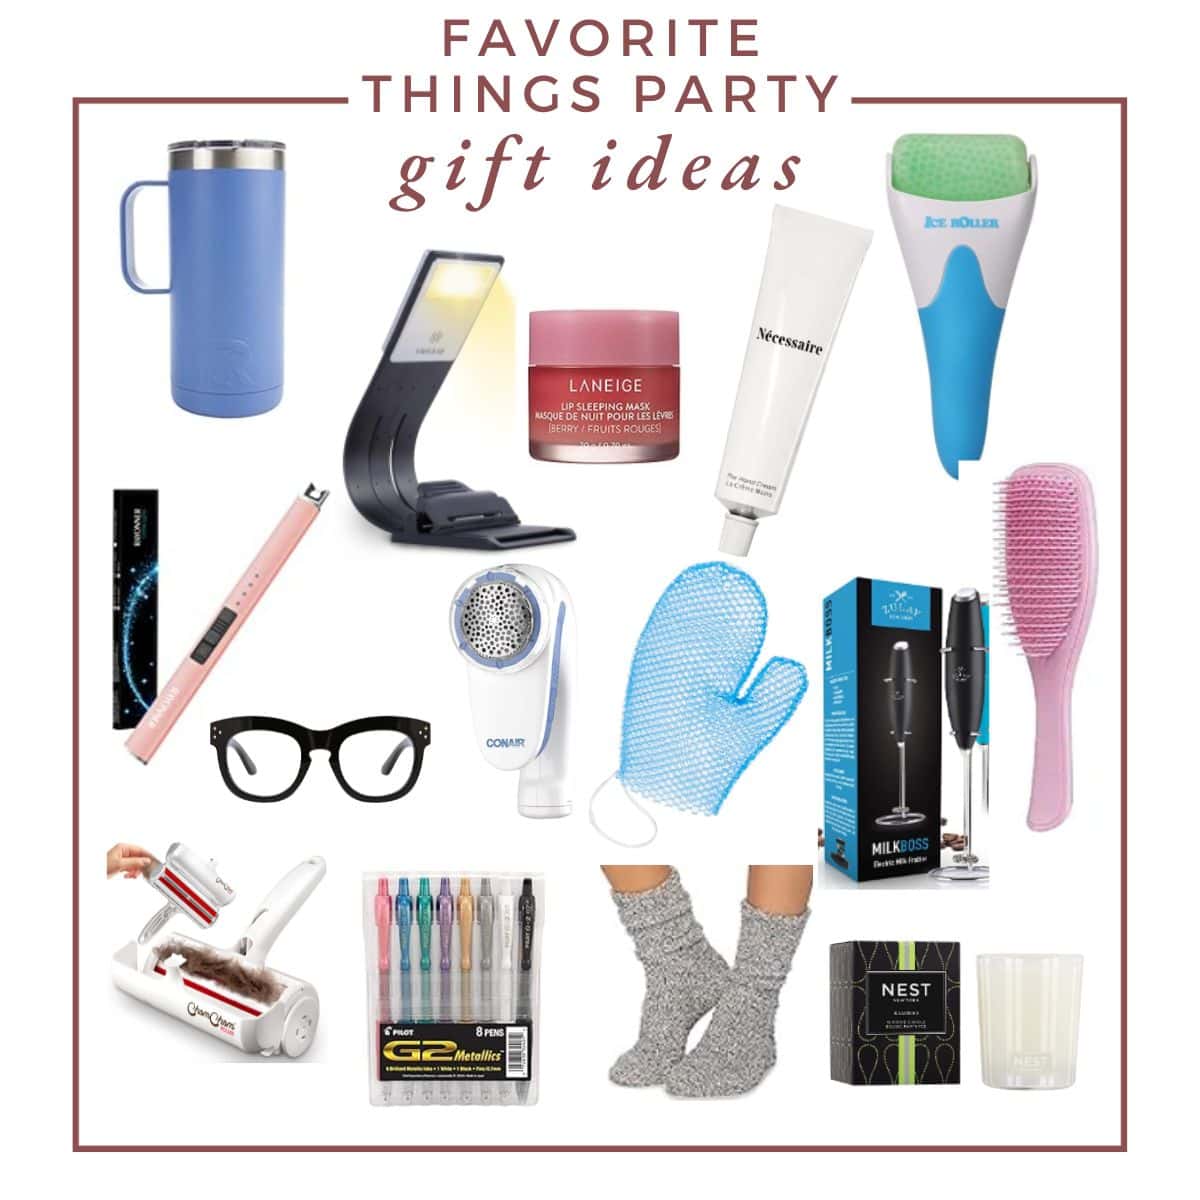 50 Best Favorite Things Party Gift Ideas Under $25